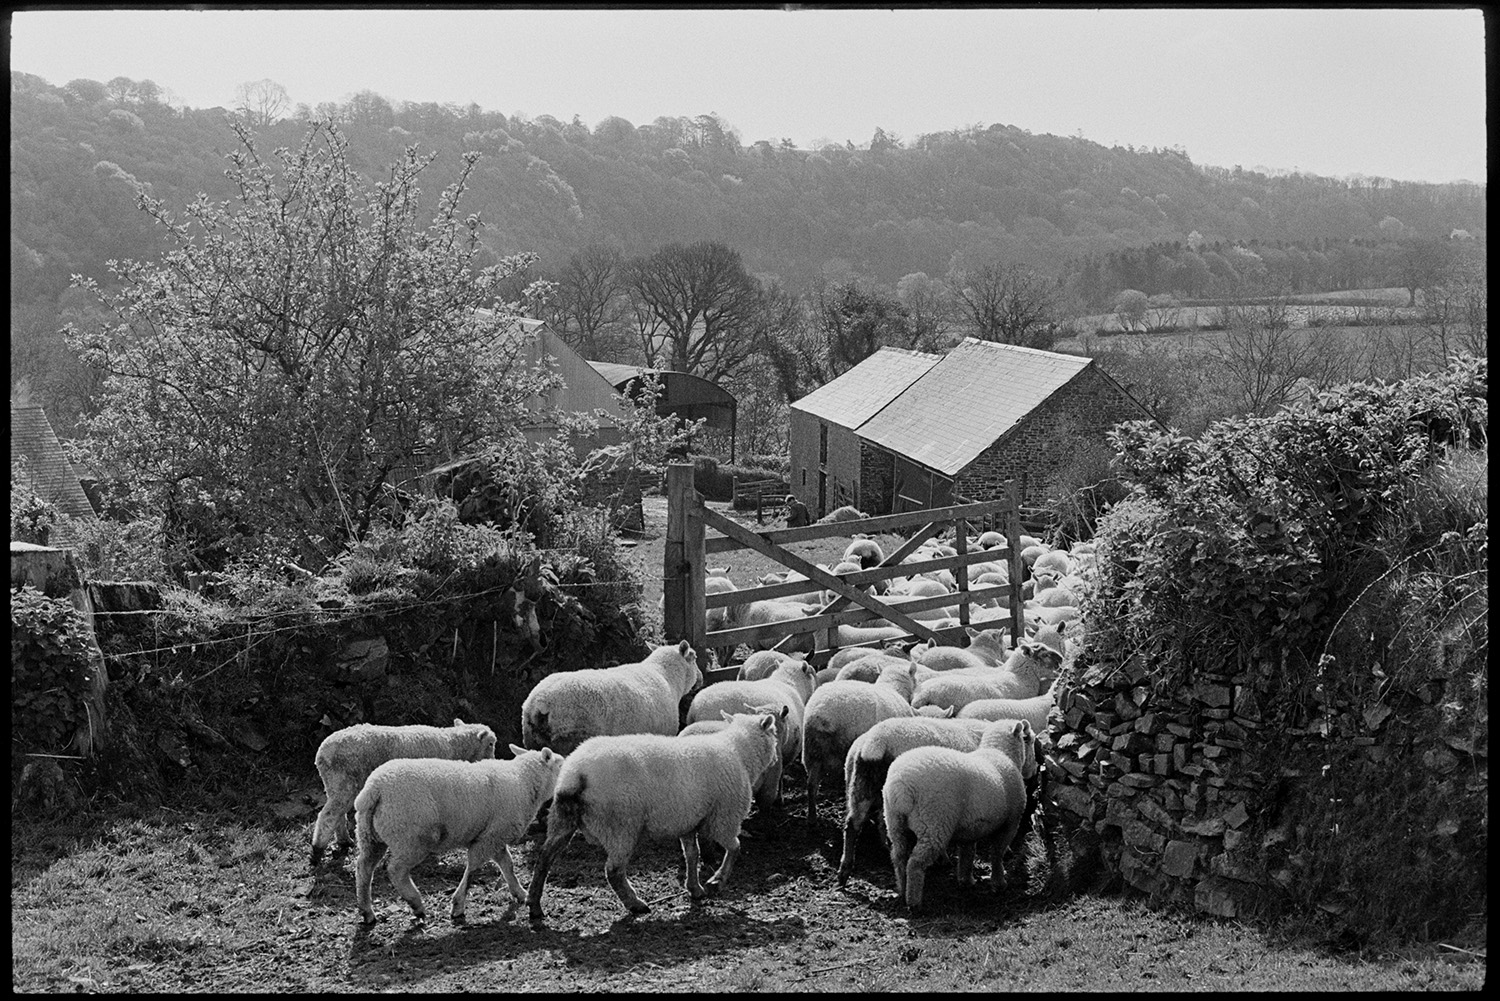 Flock of sheep going into farmyard. <br />
[Sheep walking through a wooden gateway into the farmyard at Greatwood, Merton. Barns and a wooded hillside can be seen in the background.]